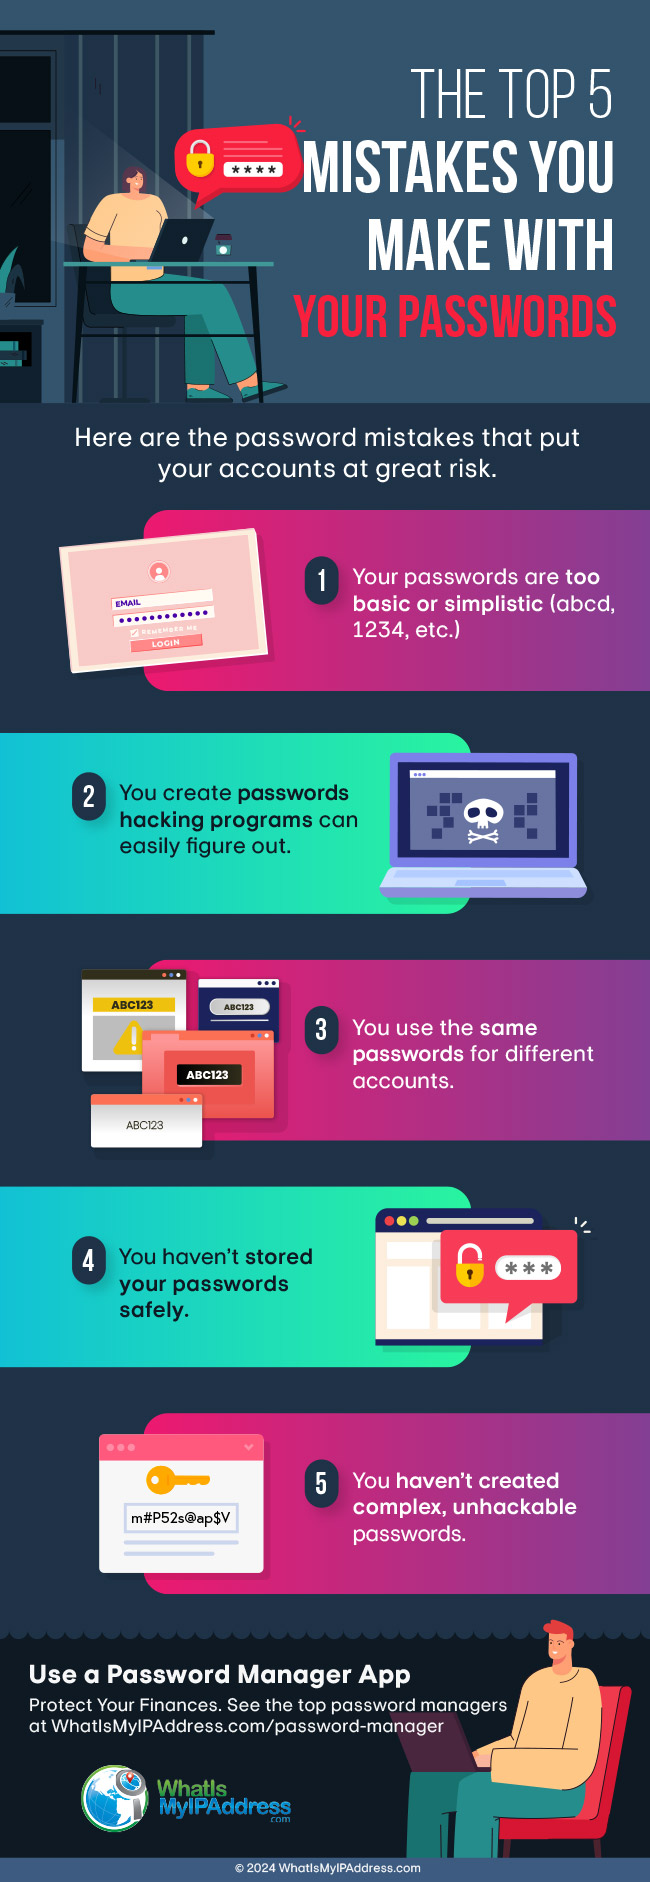 The Top 5 Mistakes You Make With Your Passwords